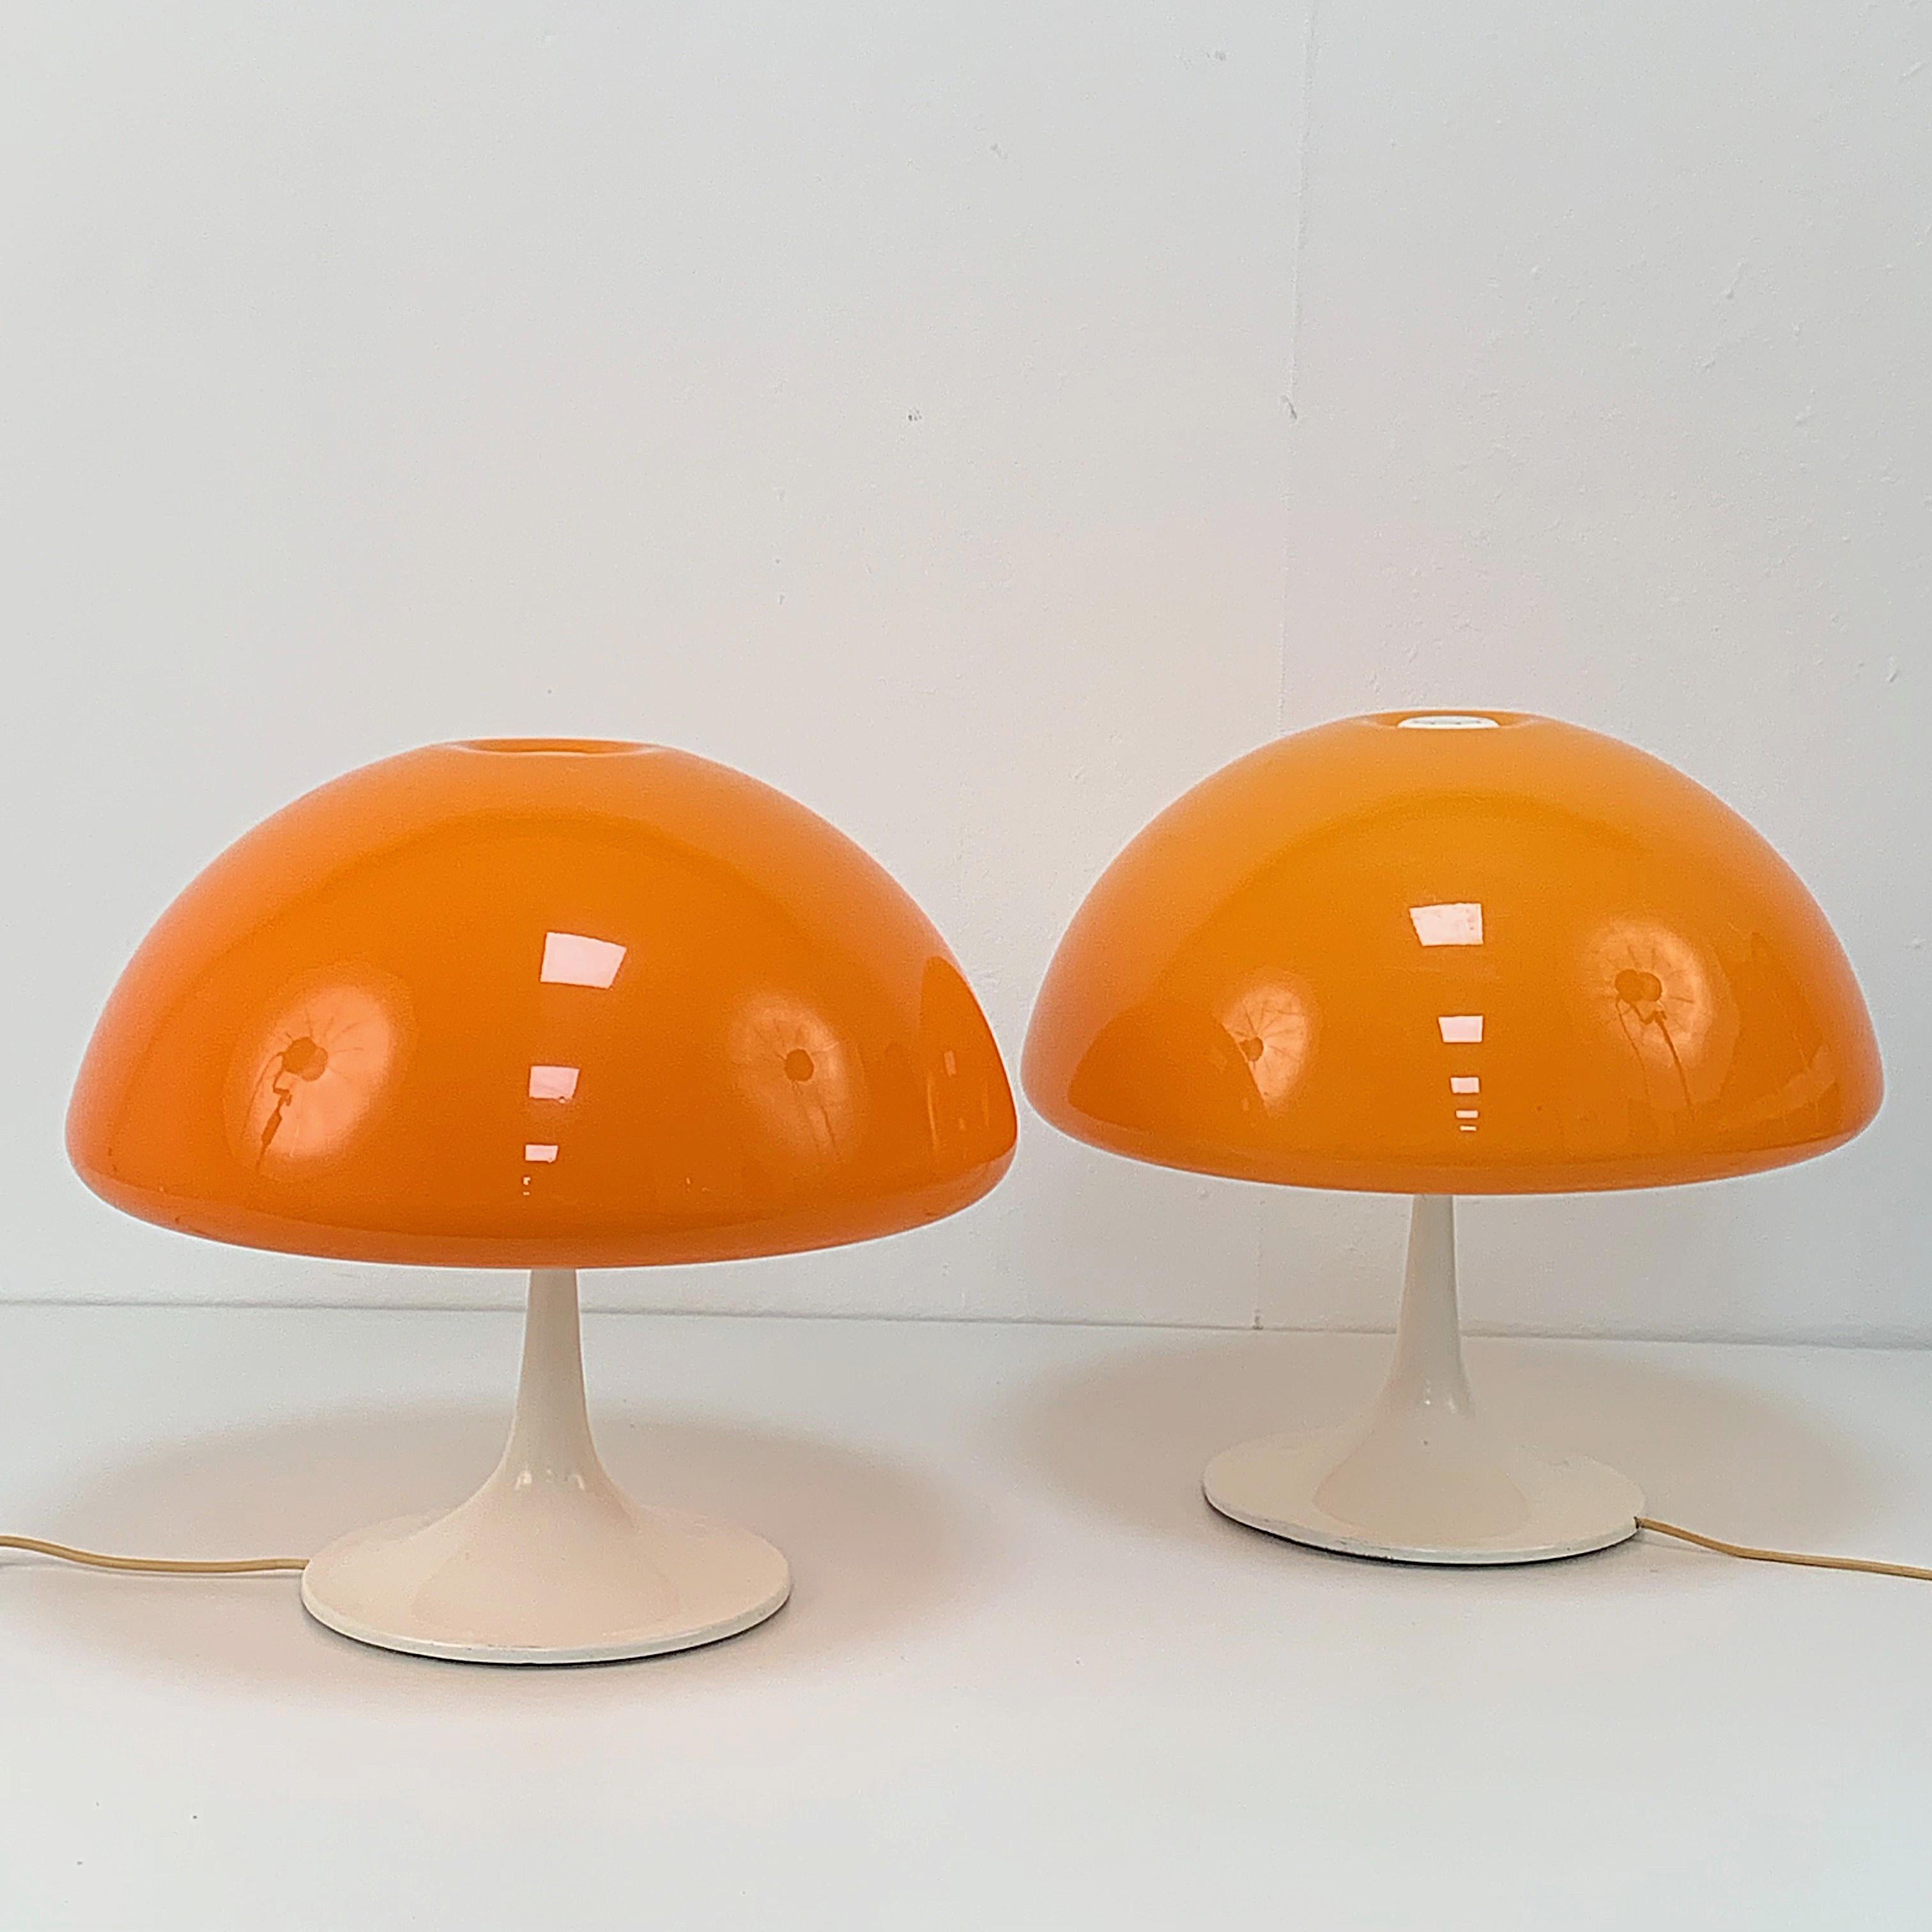 Beautiful pair of table lamps, the base is in white enamelled metal, the hat is made of plastic. 
Materials: Plastic (acrylic/methacrylate) and white painted aluminium. 3 Bakelite sockets.
Height: 42 cm / 16.53” - Width: ∅ 45 cm / 17.71” - Base: ∅